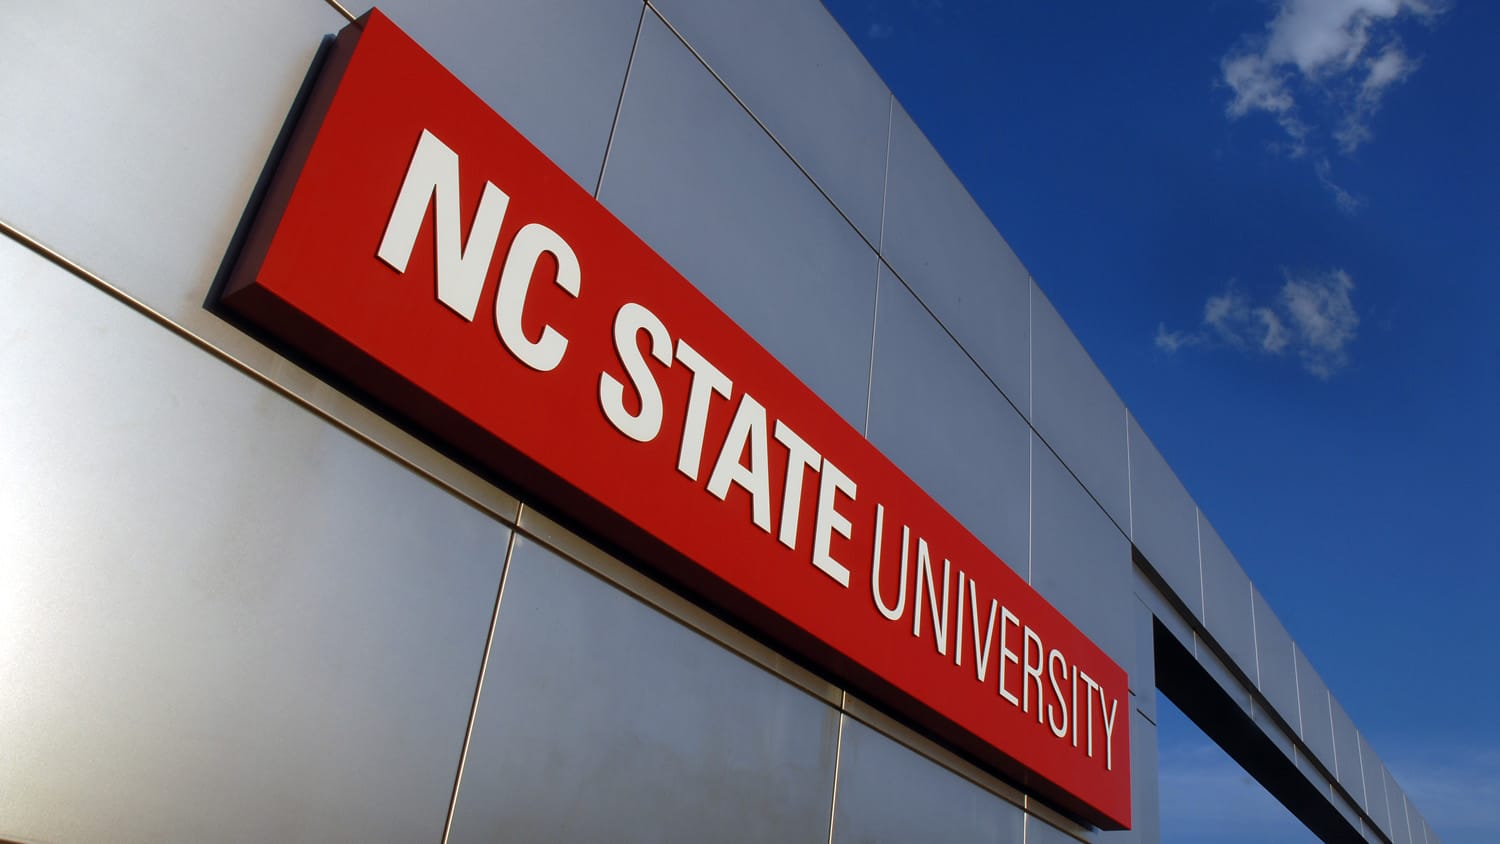 Campus gateway sign that reads NC State University